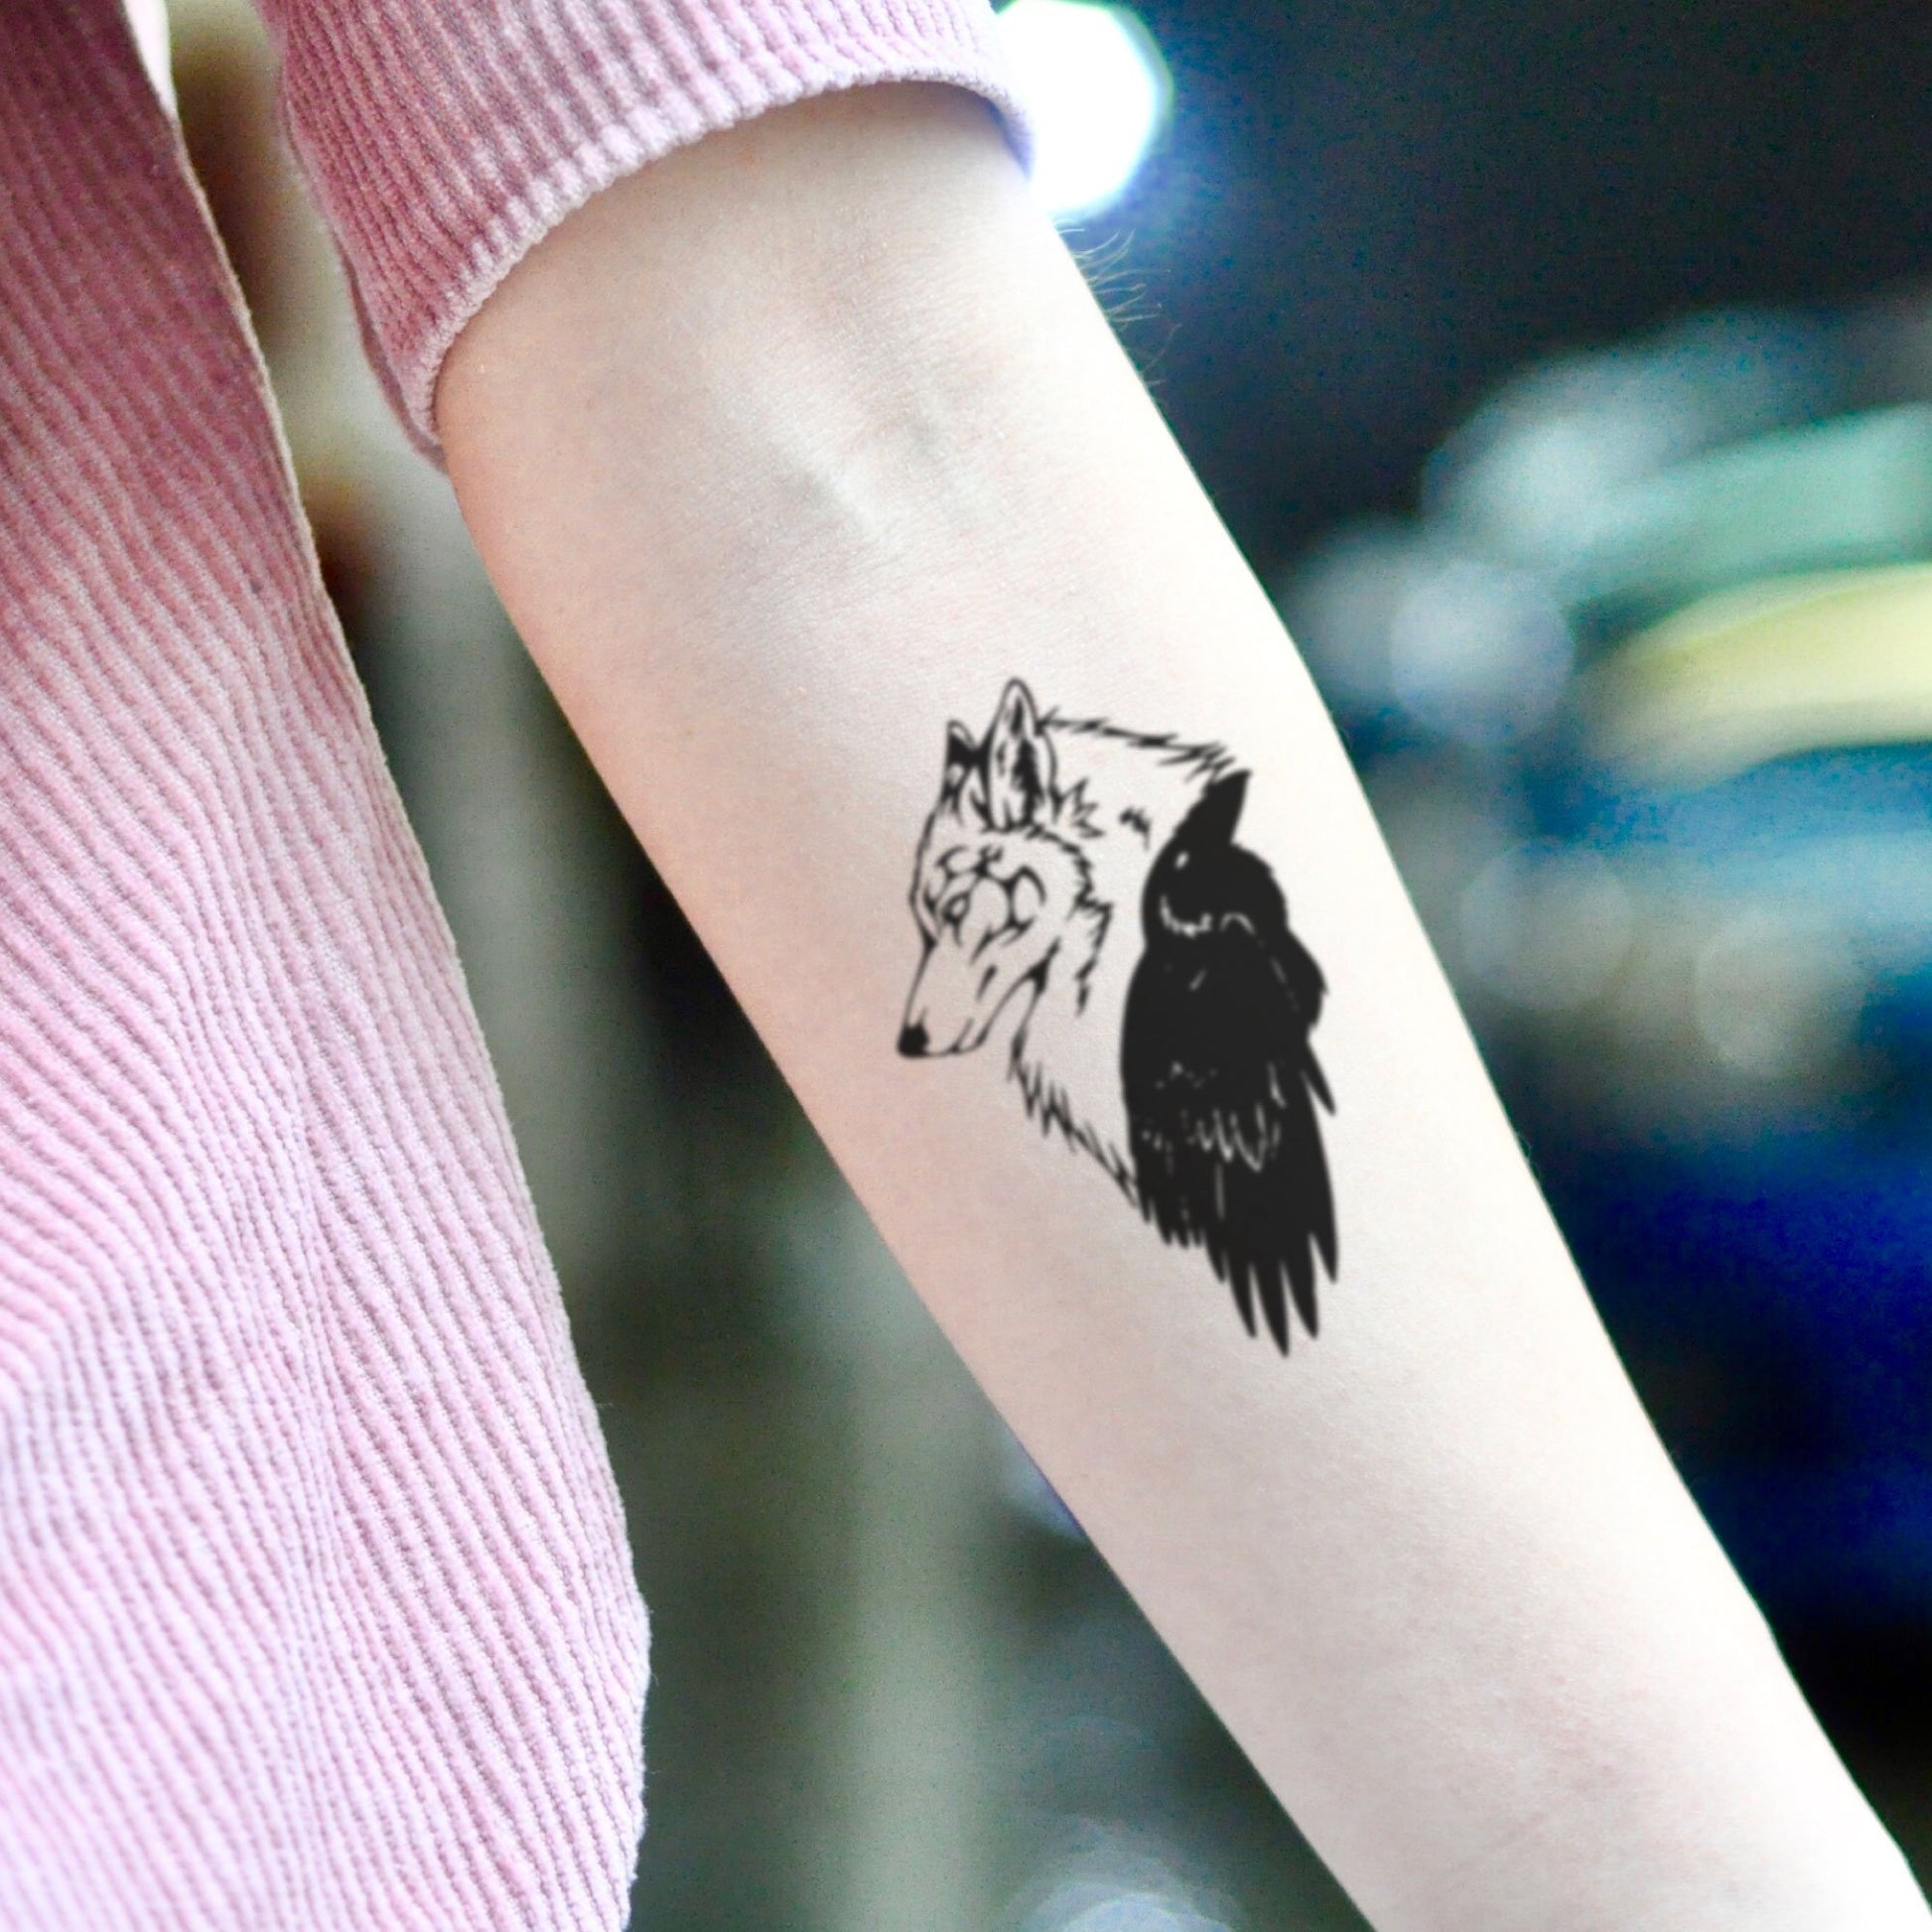 fake small wolf and raven cub animal temporary tattoo sticker design idea on inner arm